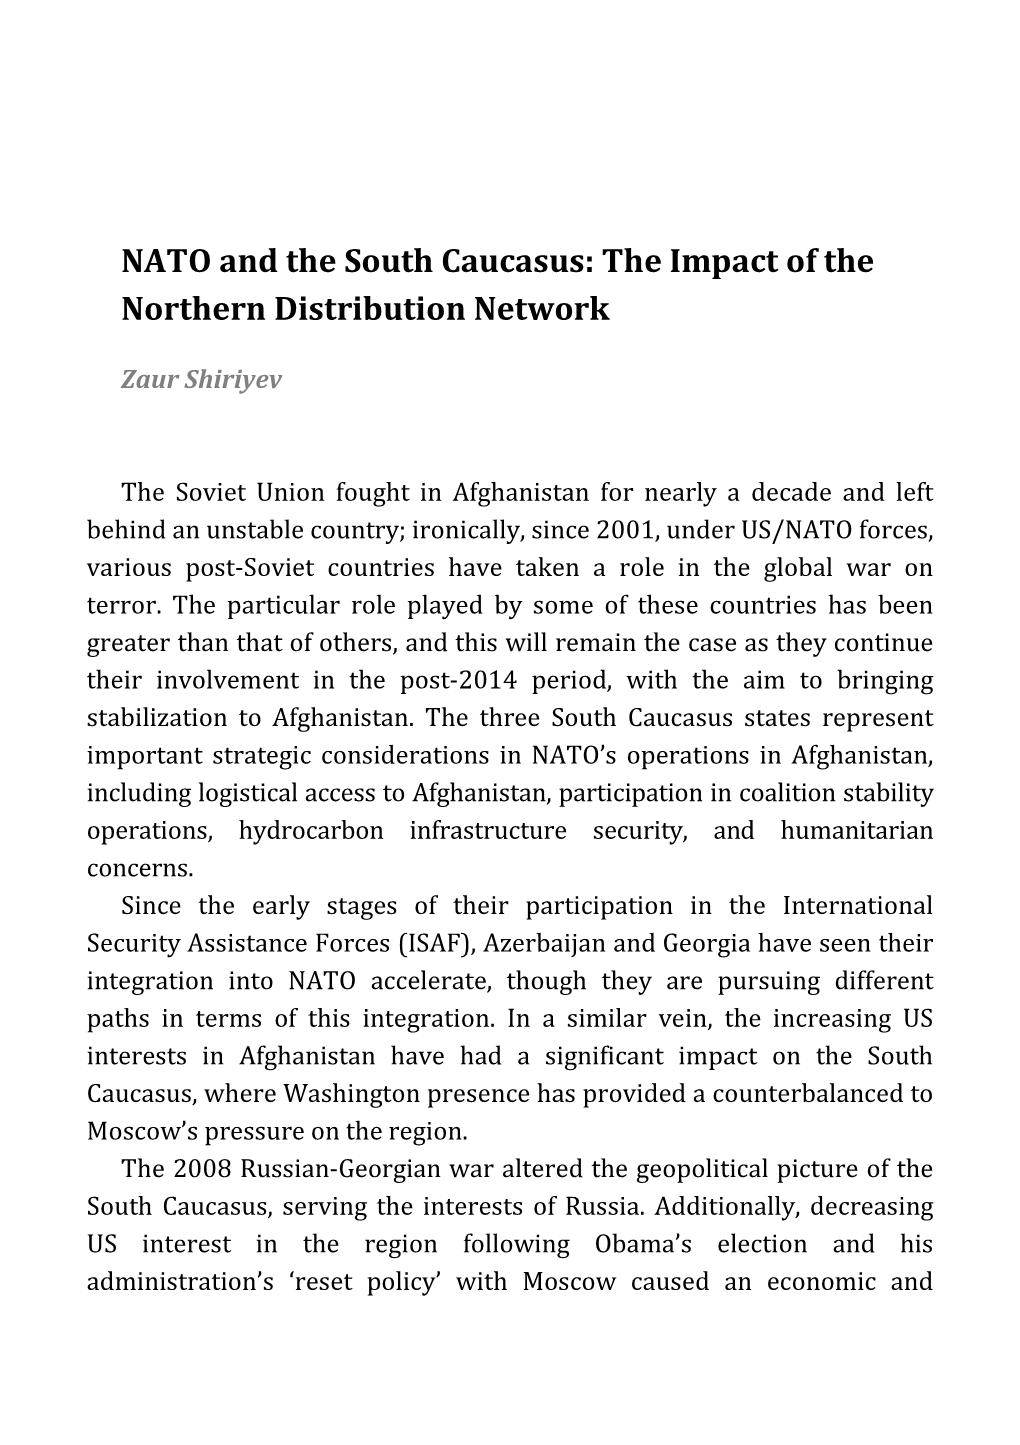 NATO and the South Caucasus: the Impact of The